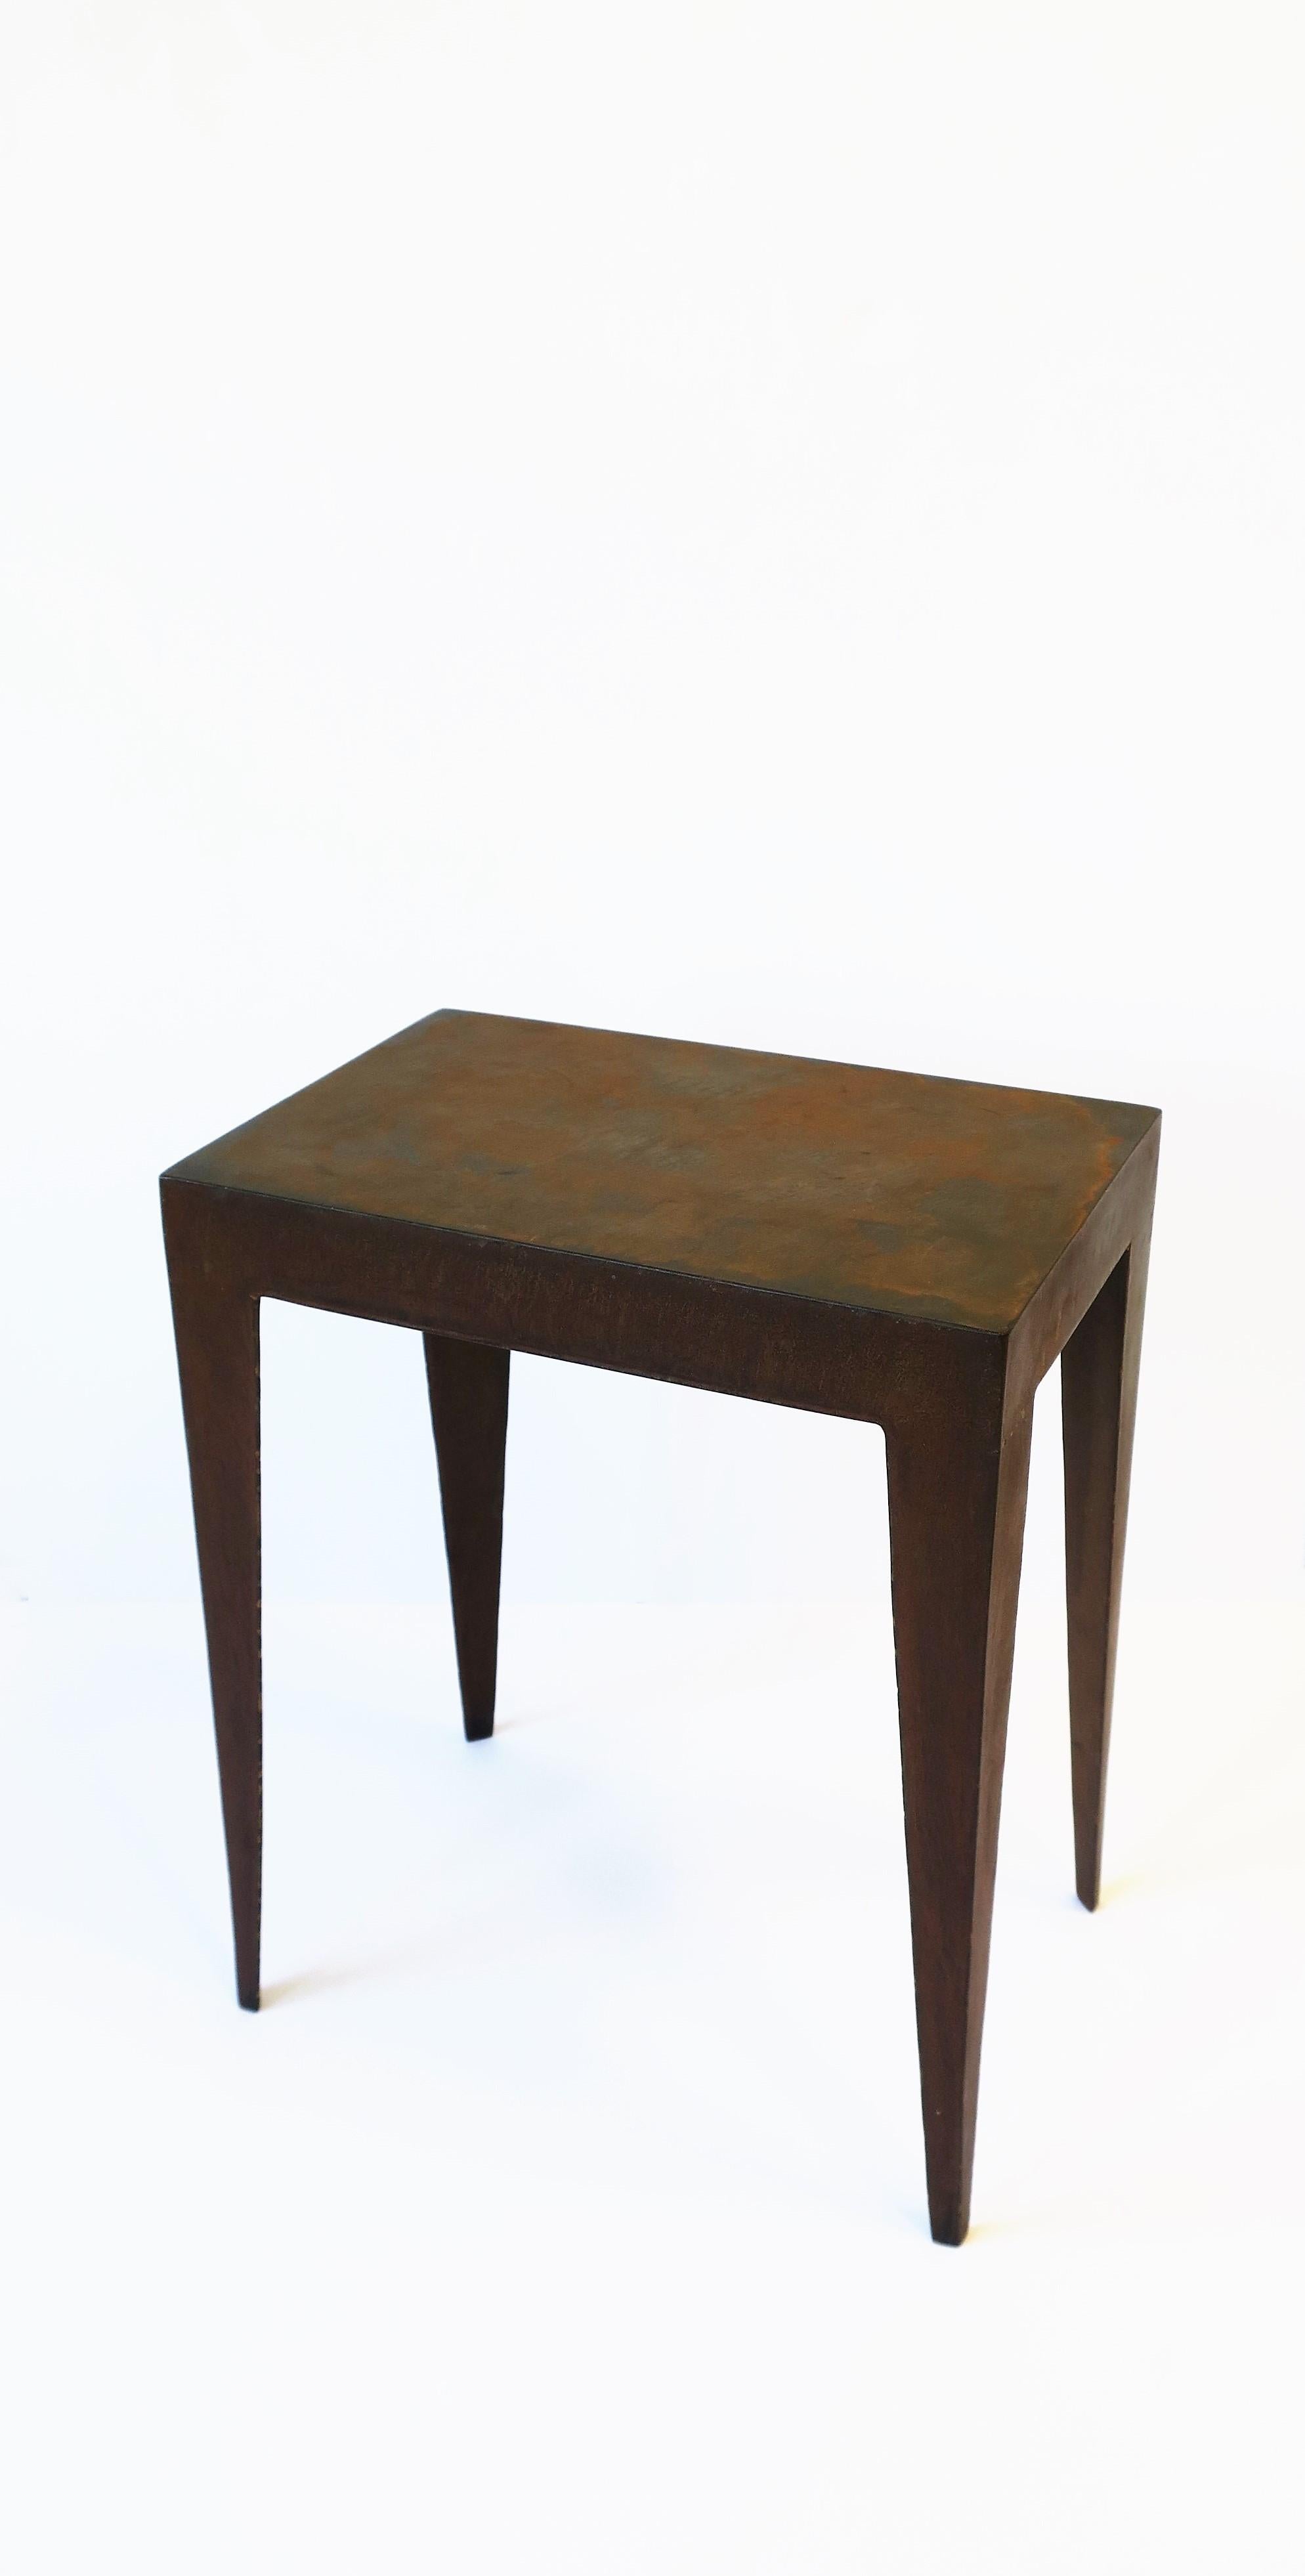 A substantial rectangular metal side, end, or drinks table with Art Deco influence, Minimalist style, circa late-20th century. Table is well-made with an intentional weathered surface and a Deco influence in the legs. Table is relatively small, a